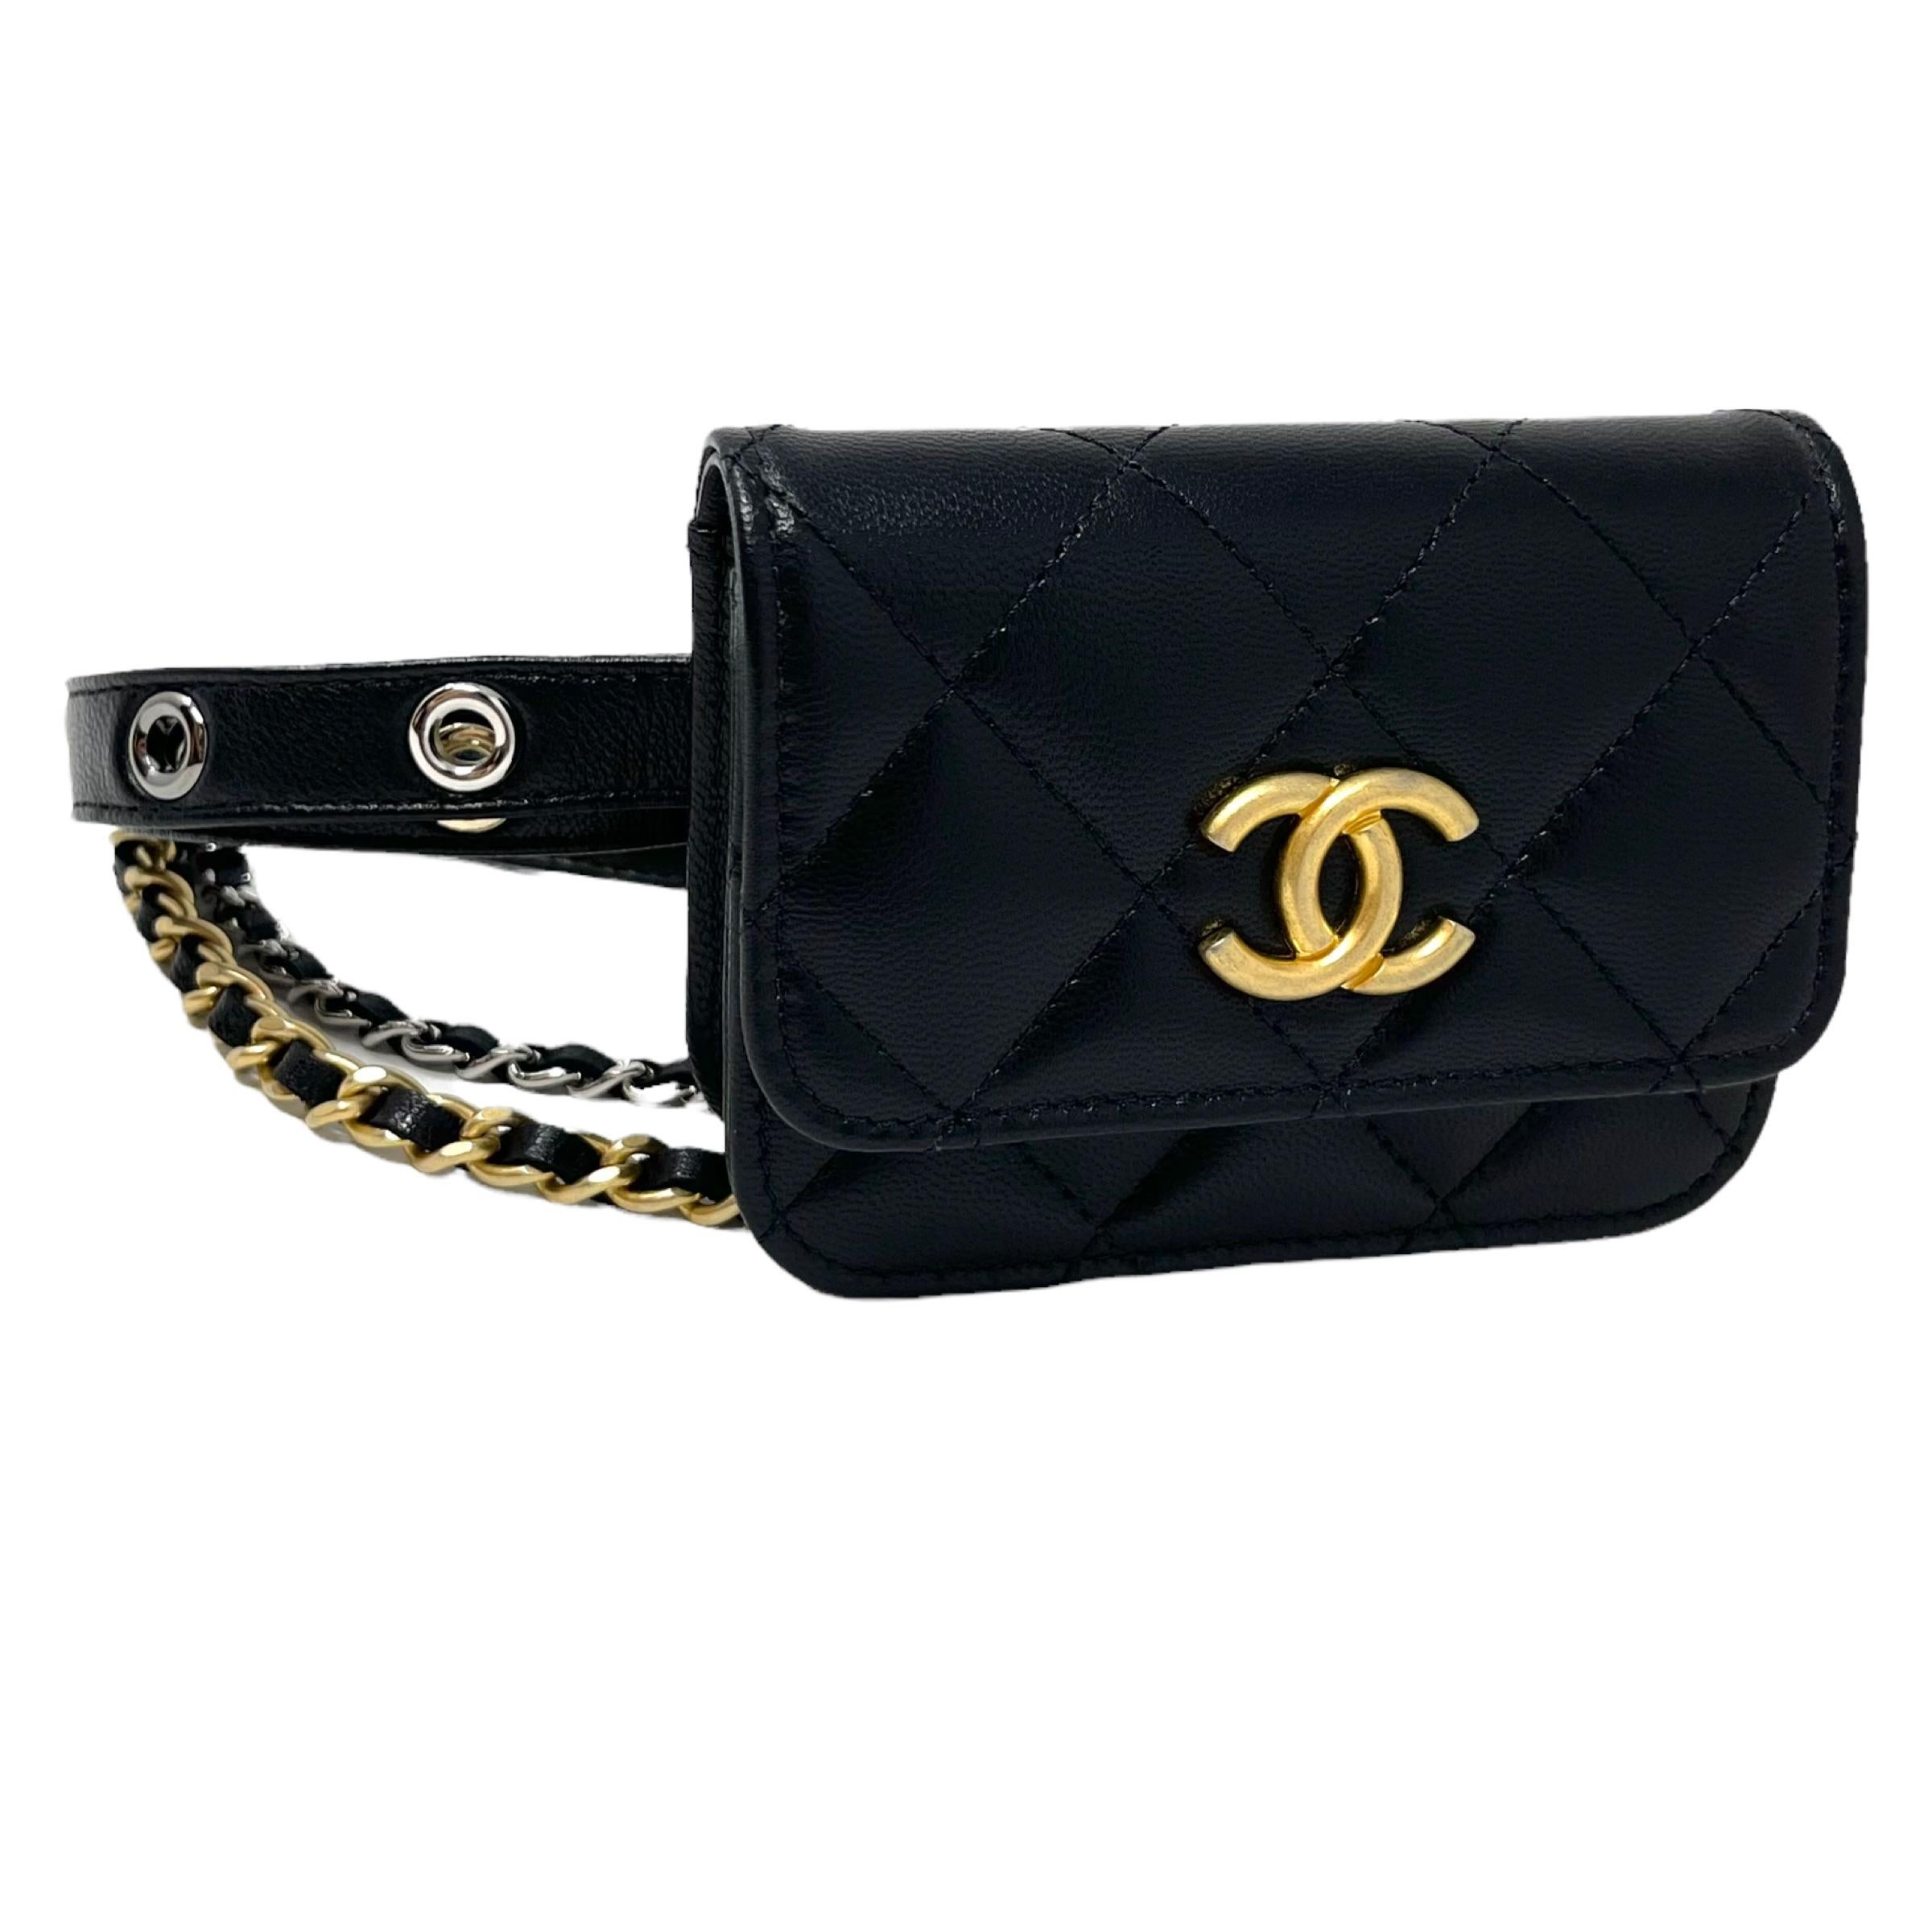 chanel new bags